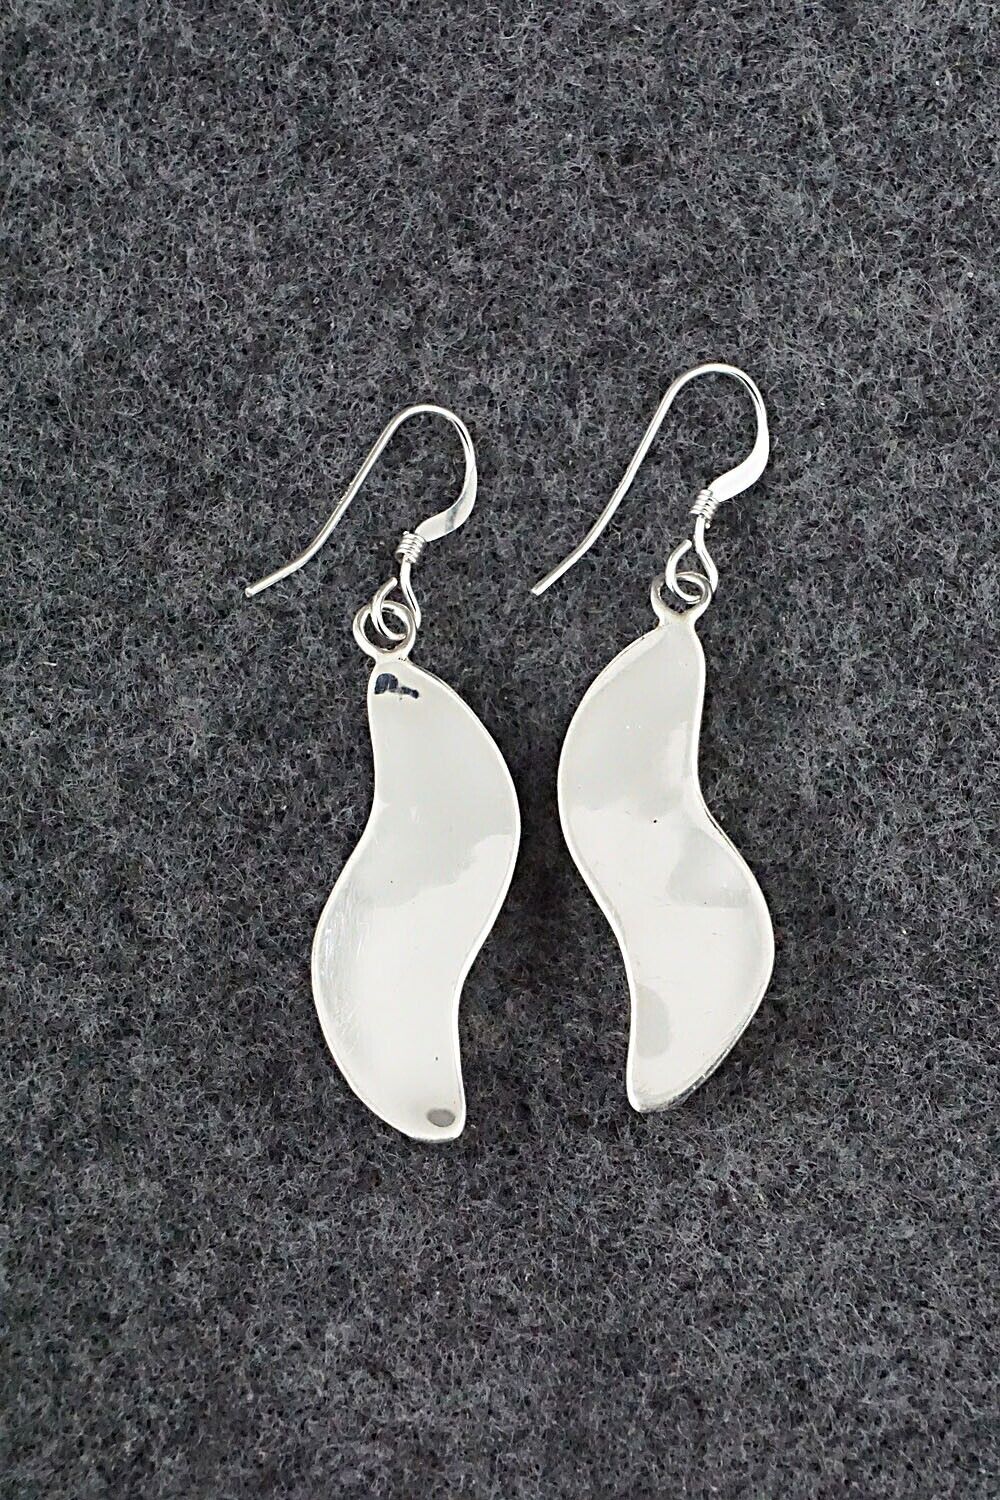 Onyx, Opalite & Sterling Silver Inlay Earrings - James Manygoats